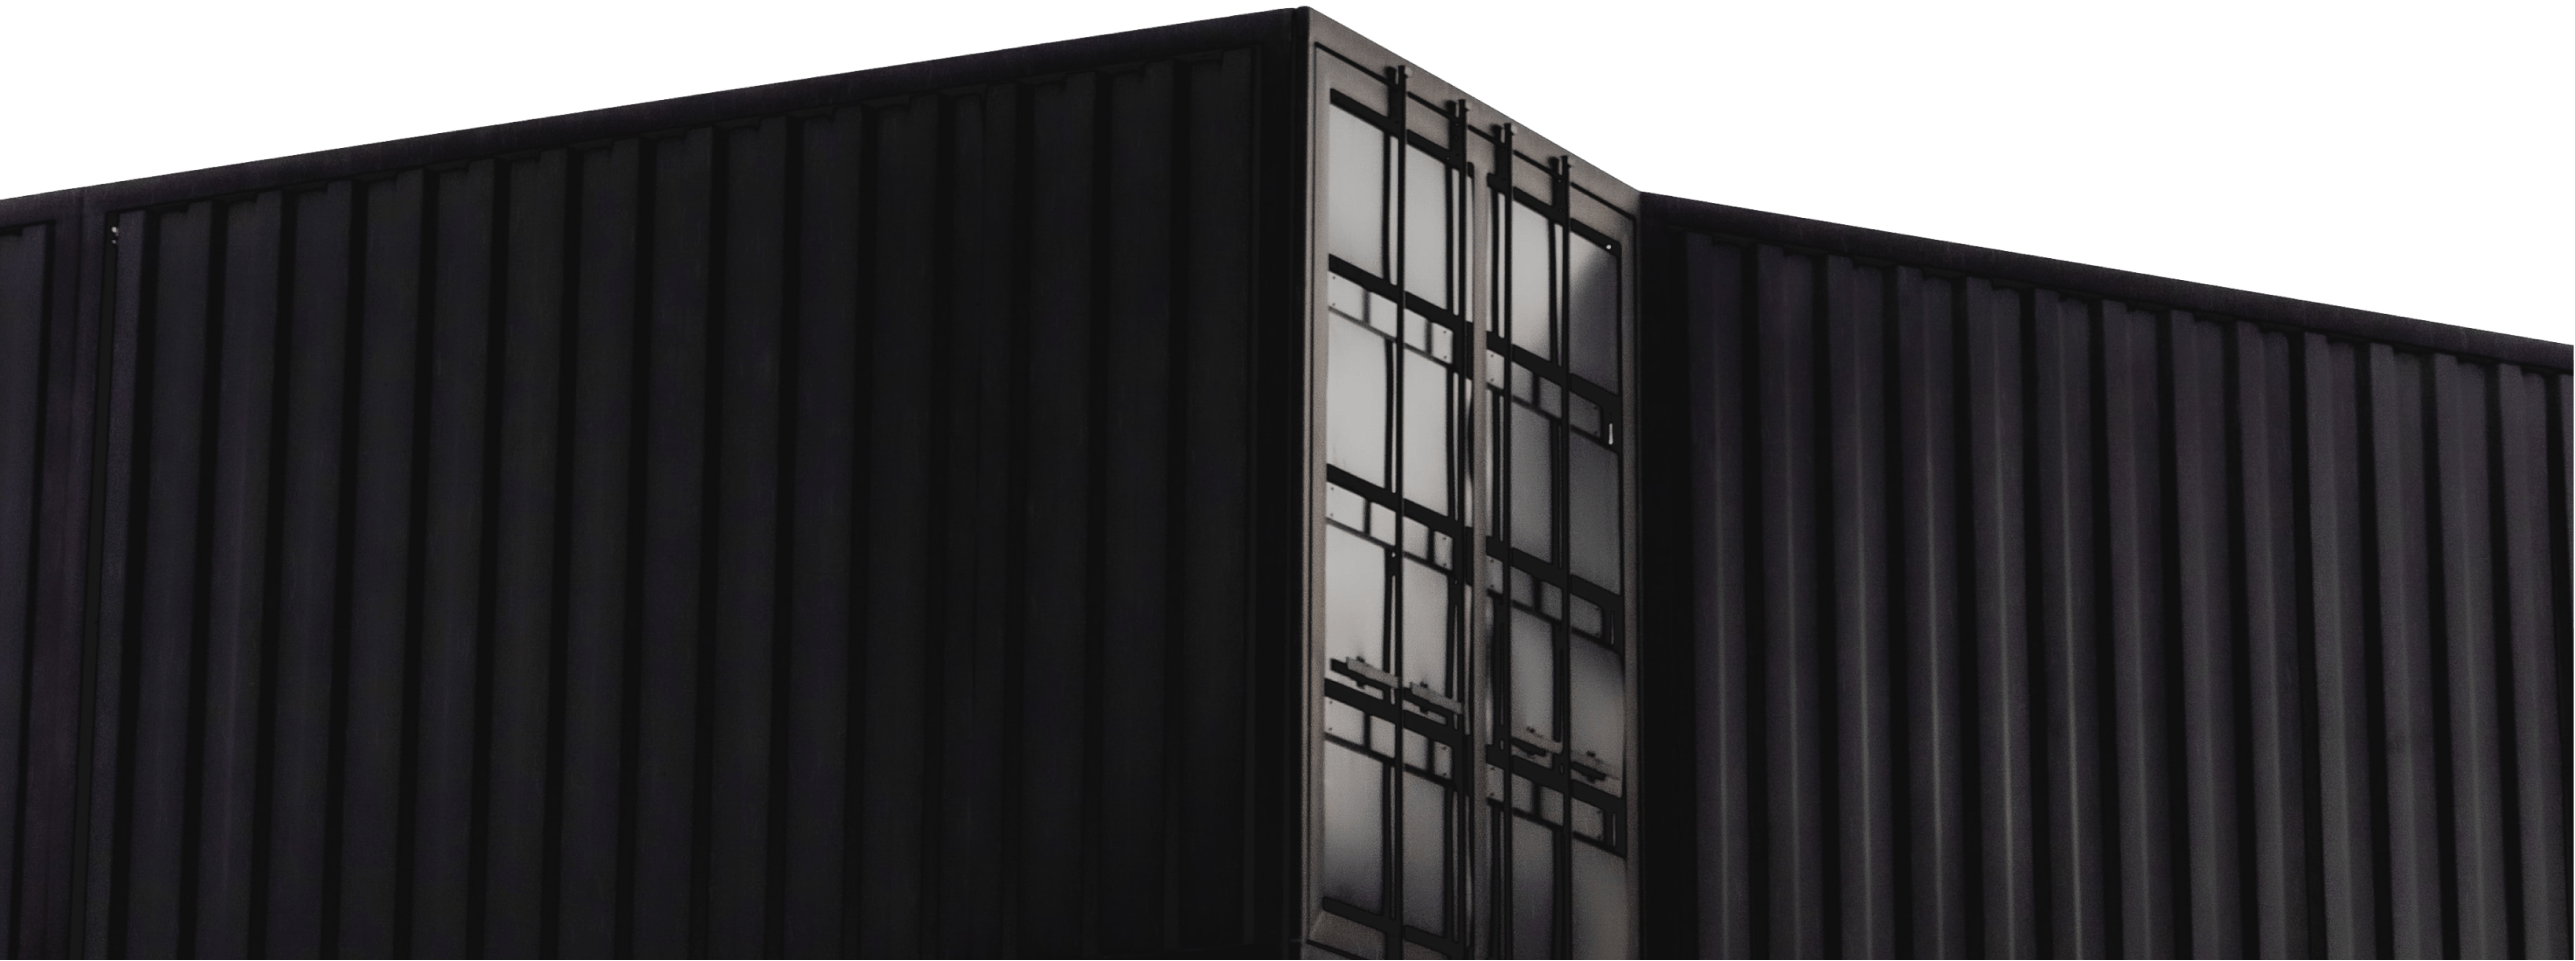 Black Shipping Containers